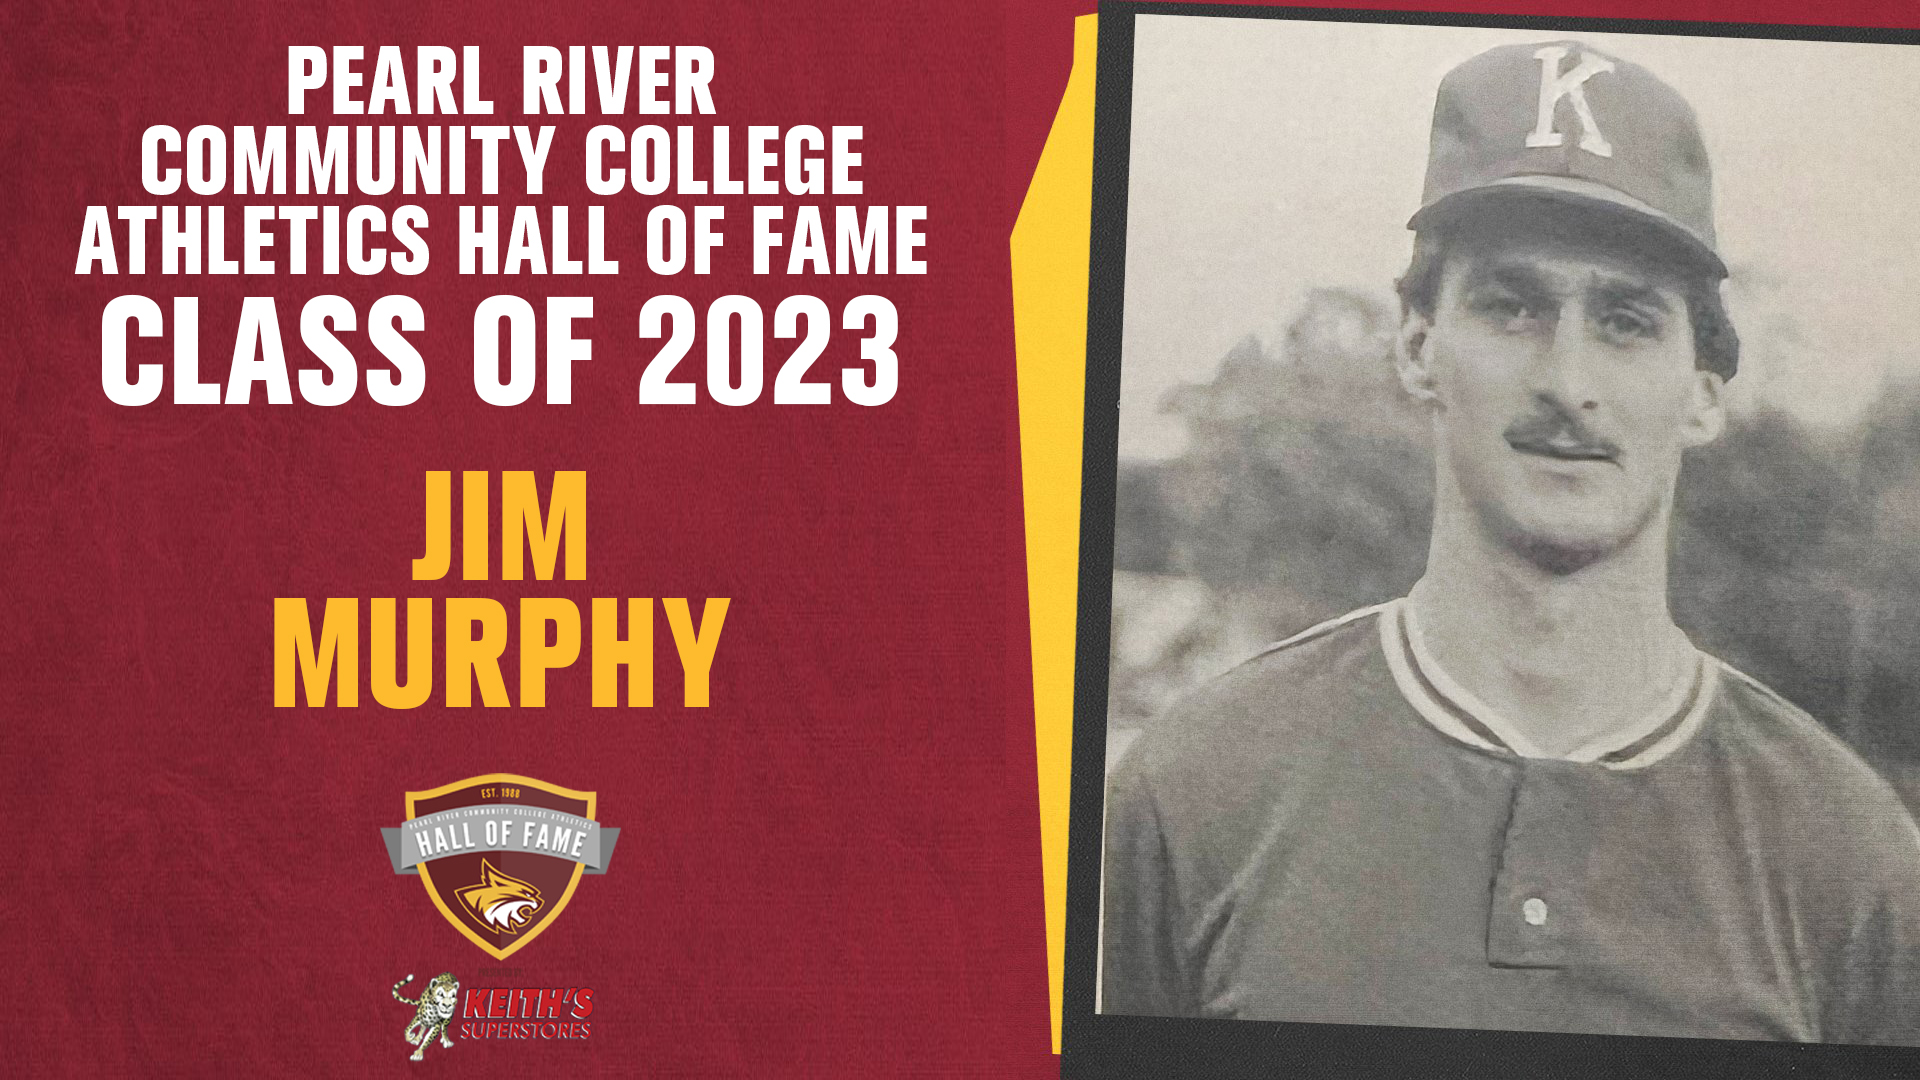 Dedication pays off for PRCC’s newest Hall of Famer, Jim Murphy